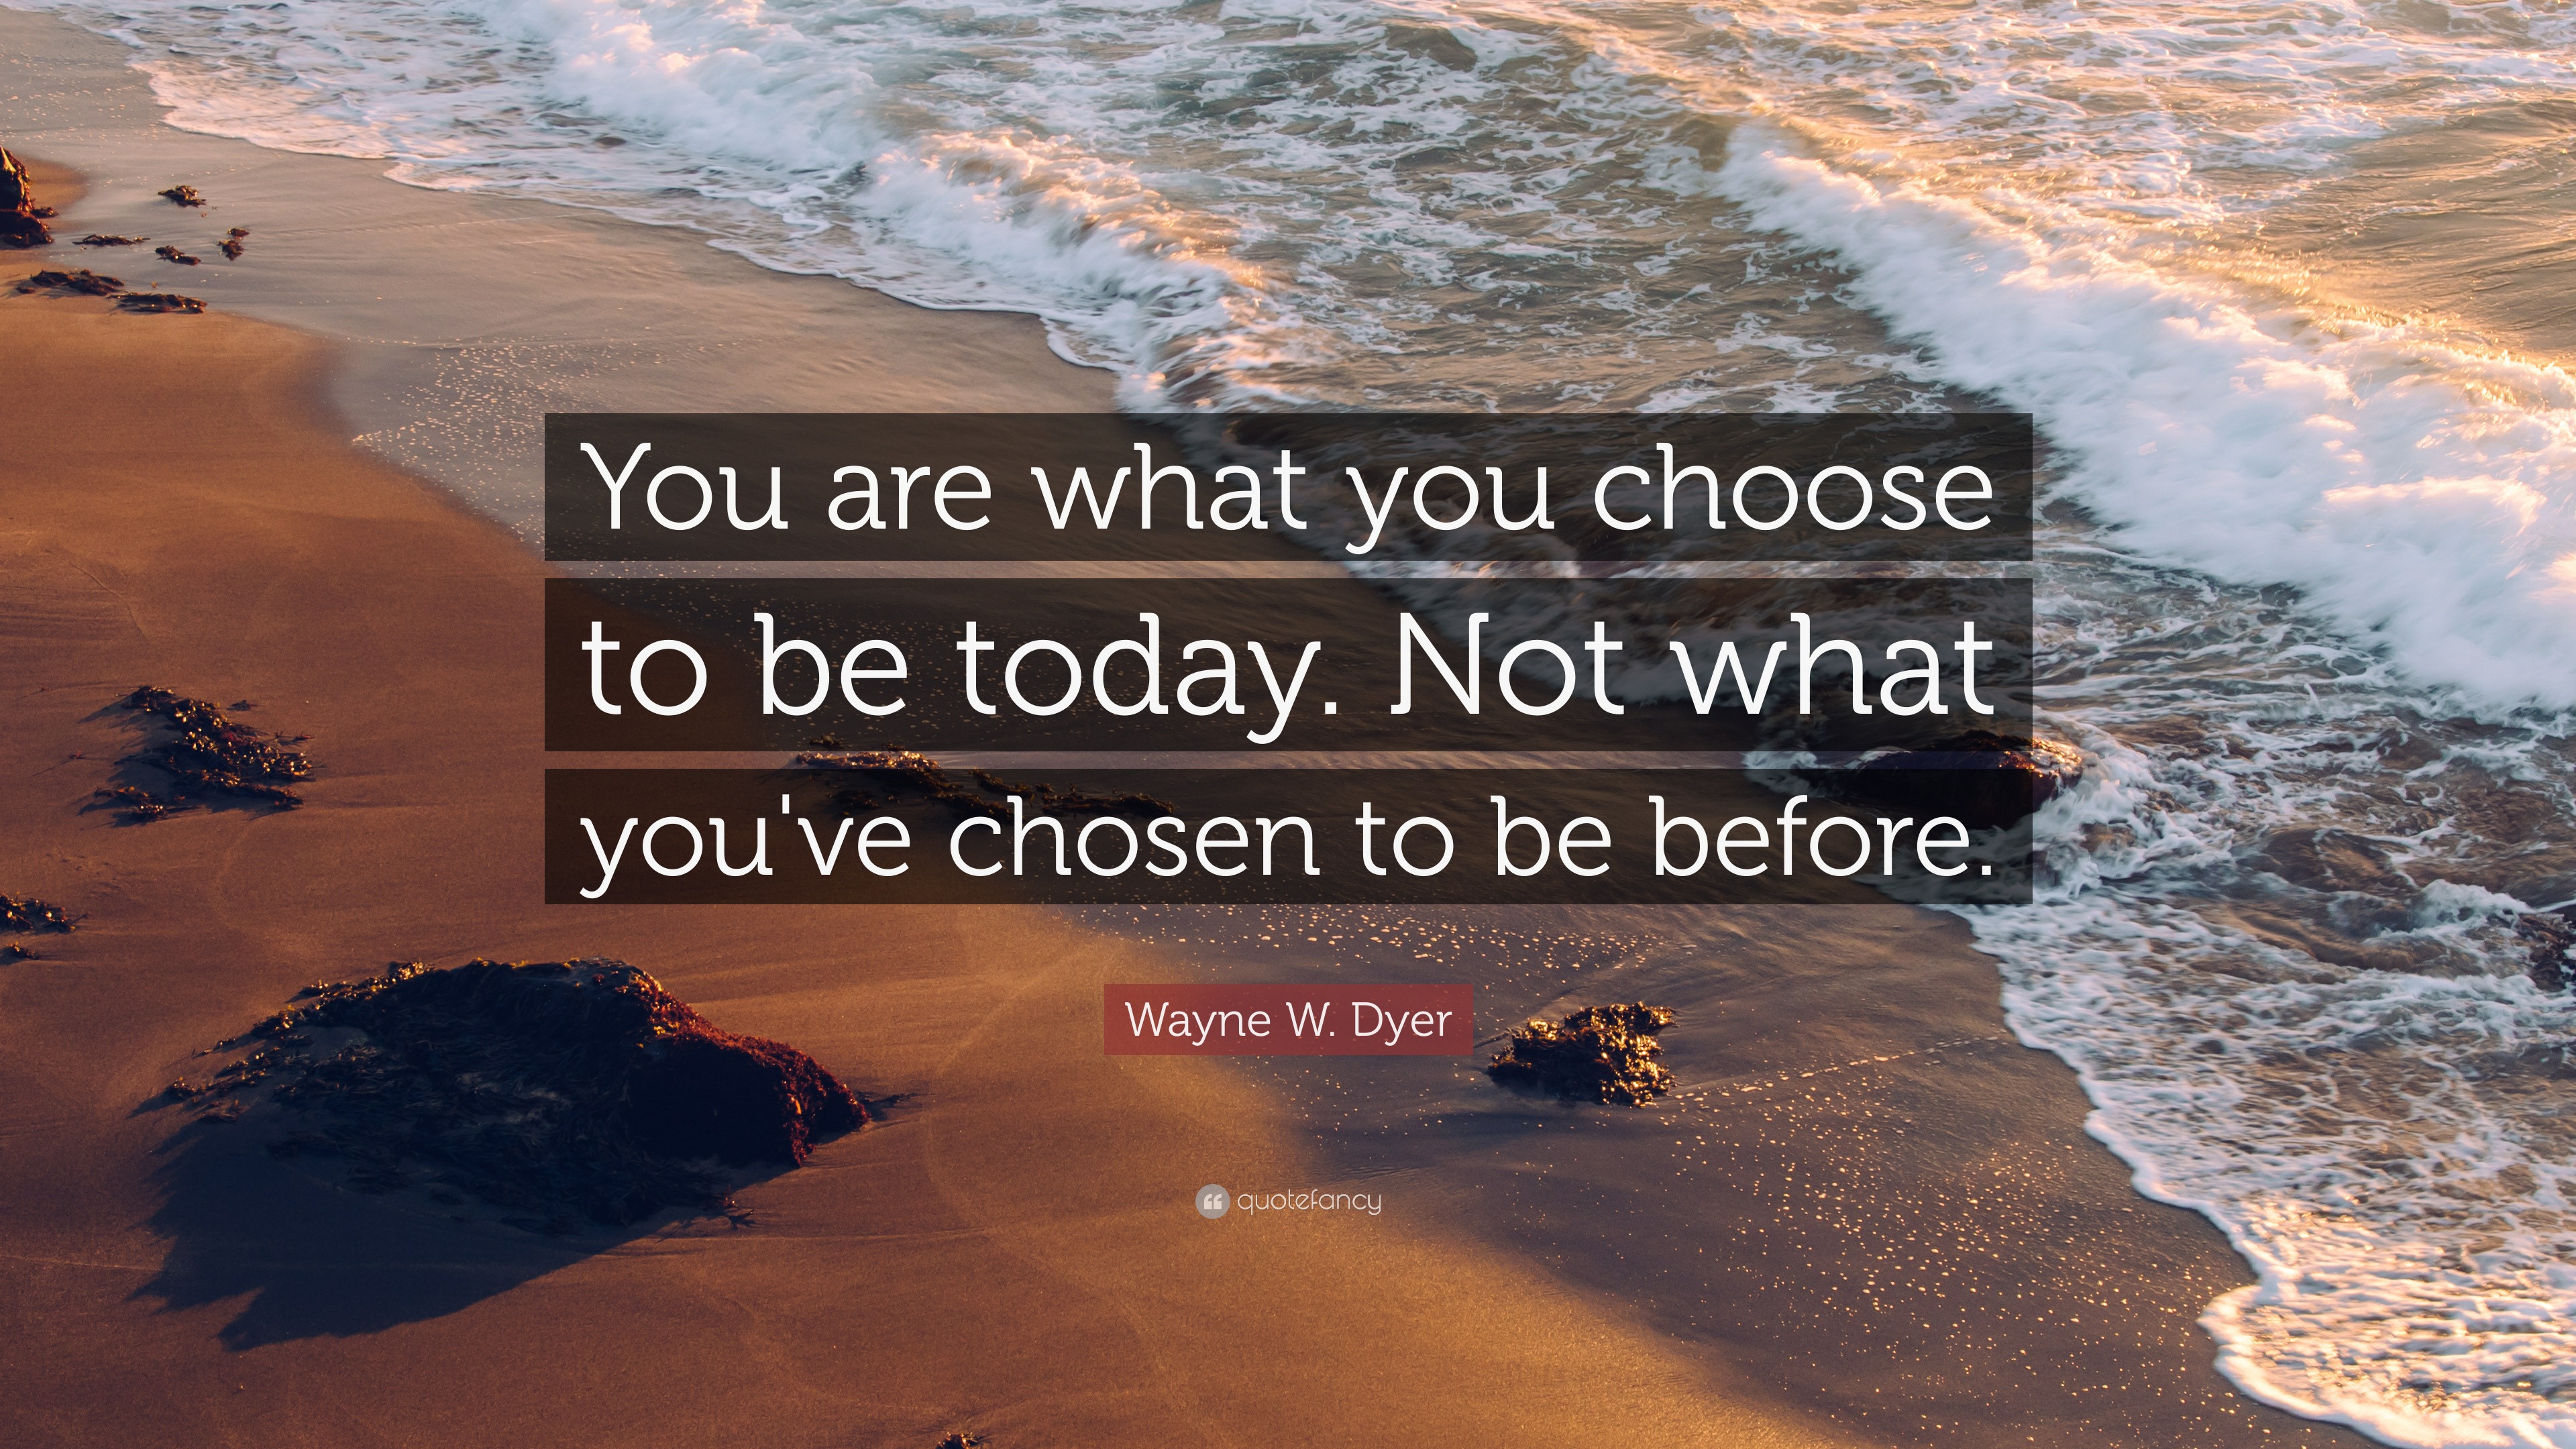 Wayne W. Dyer Quote: “You are what you choose to be today. Not what you ...